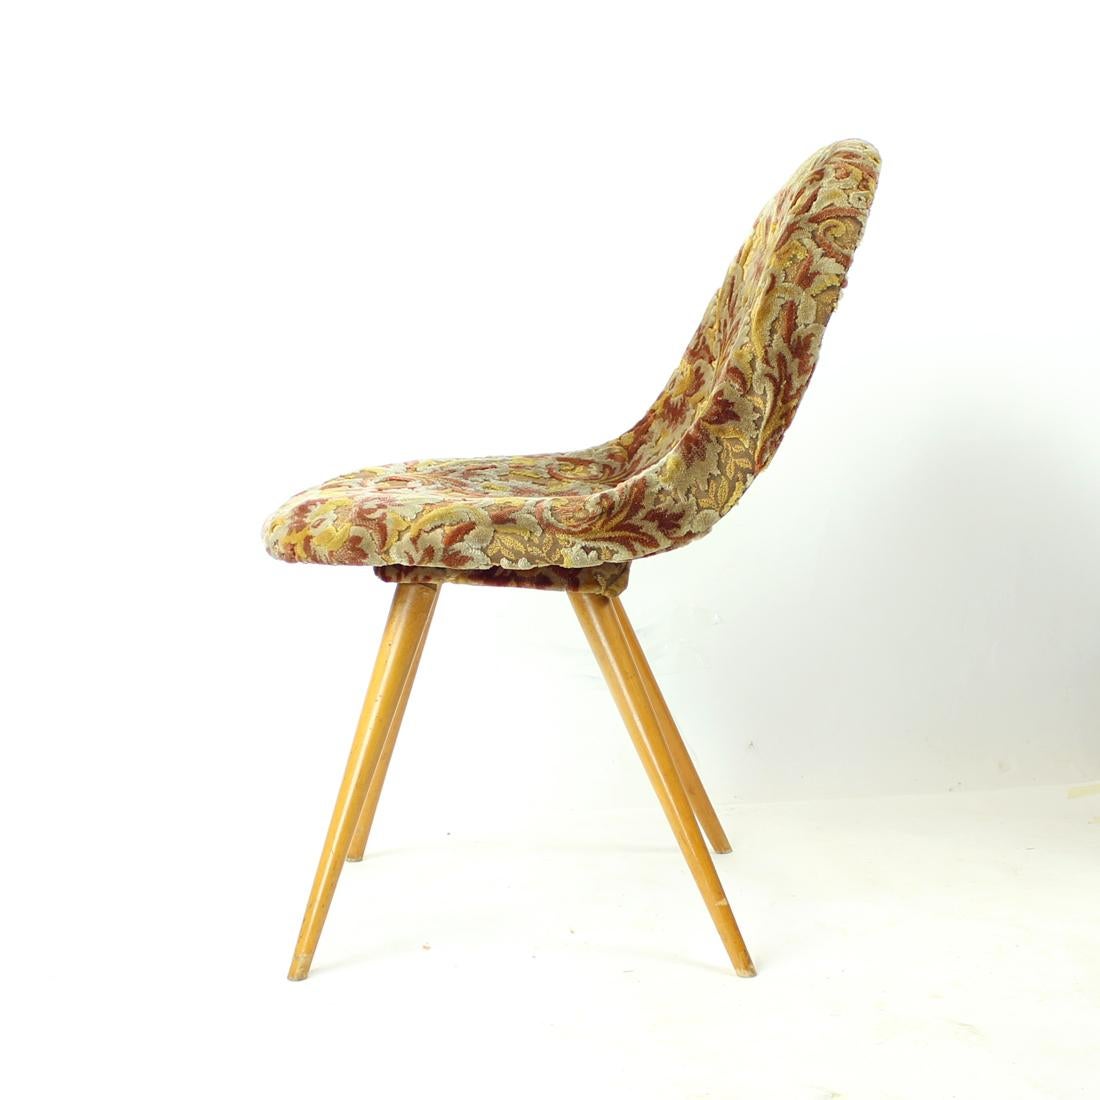 Pair Of Midcentury Shell Chairs By Miroslav Navratil, Czechoslovakia 1960s For Sale 7